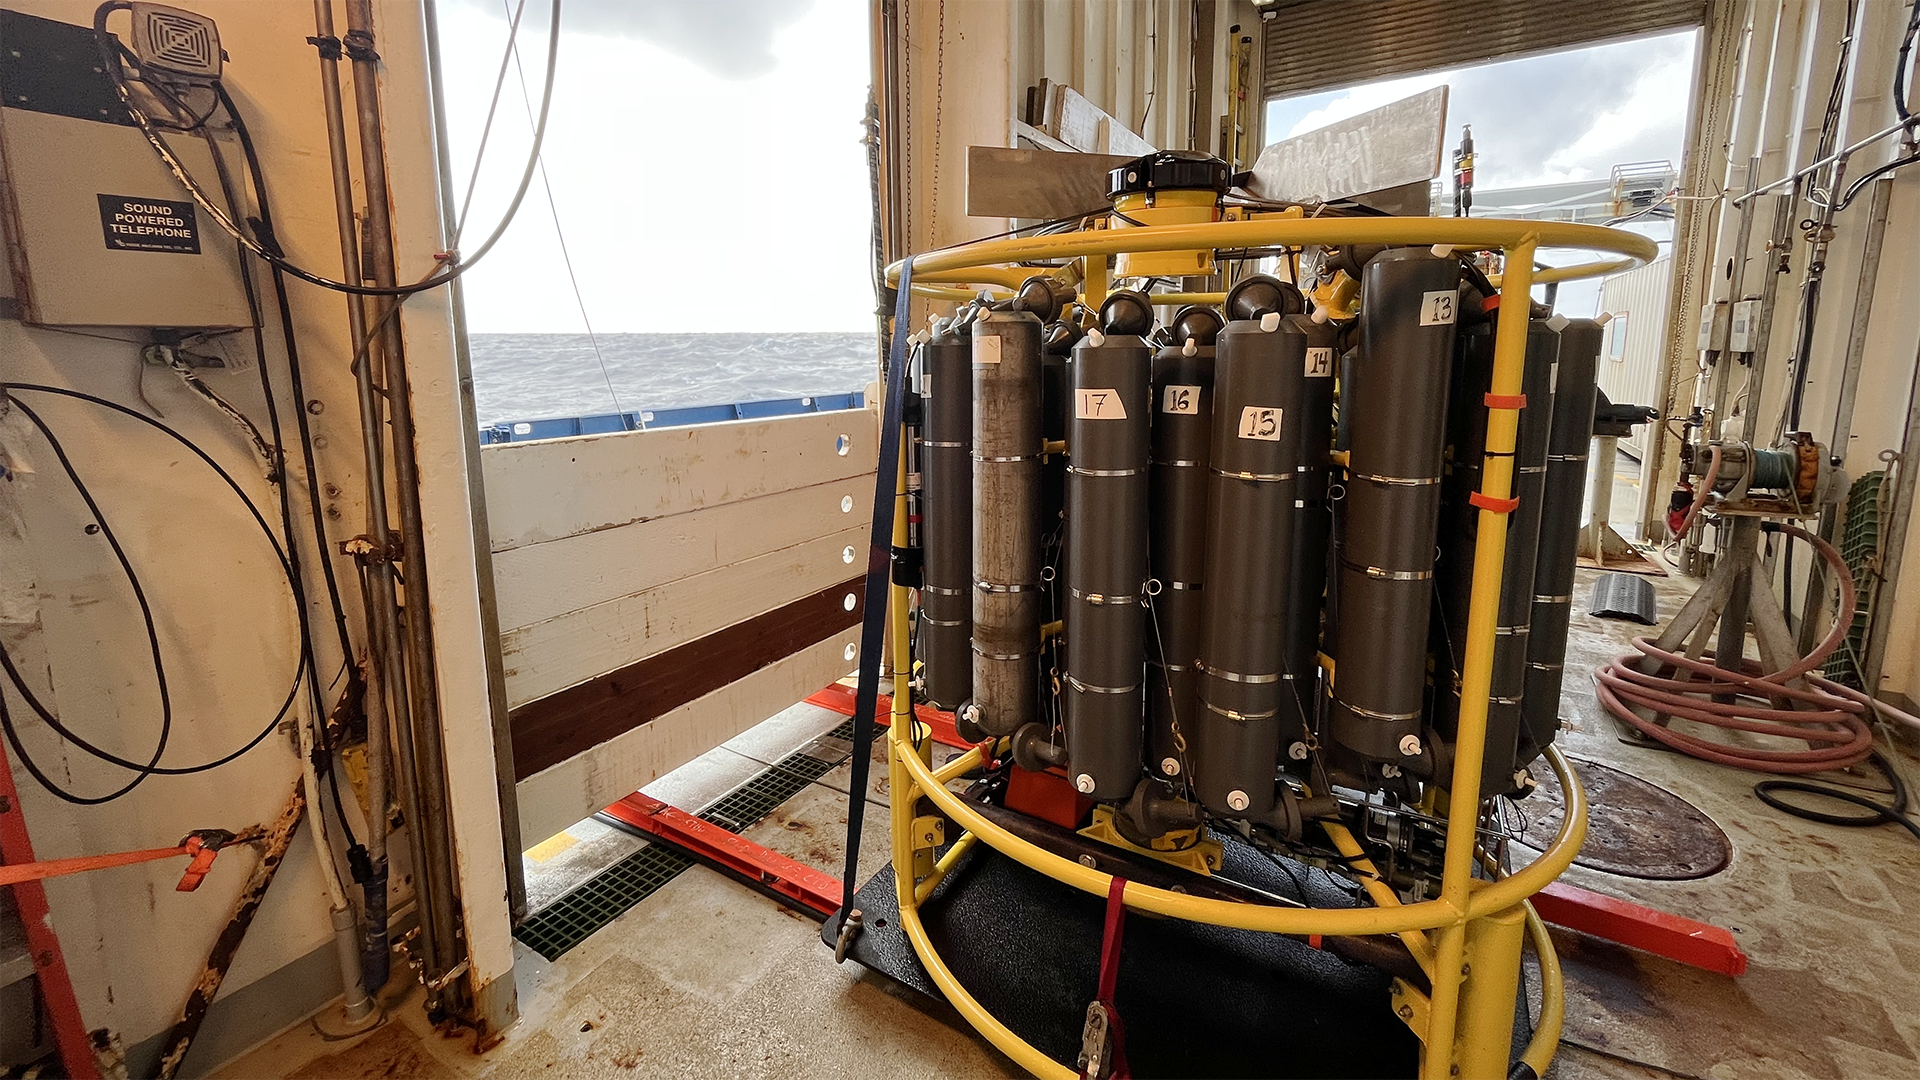 The wooden boards behind the CTD stop waves from coming in during sampling. Photo by Kirstin Petzer.